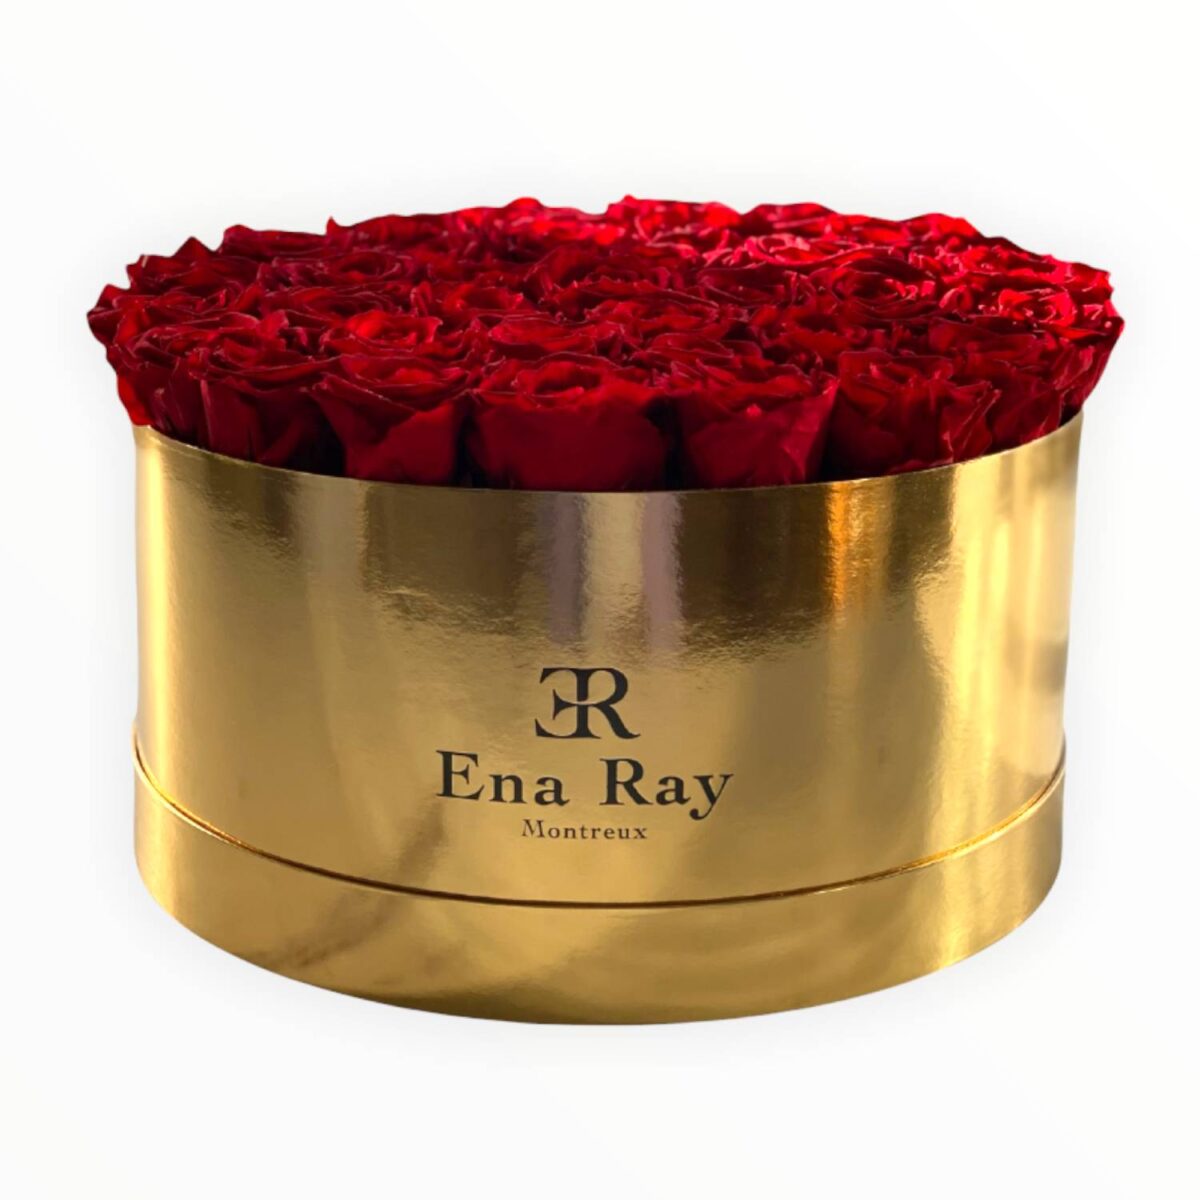 red roses in a golden hat box